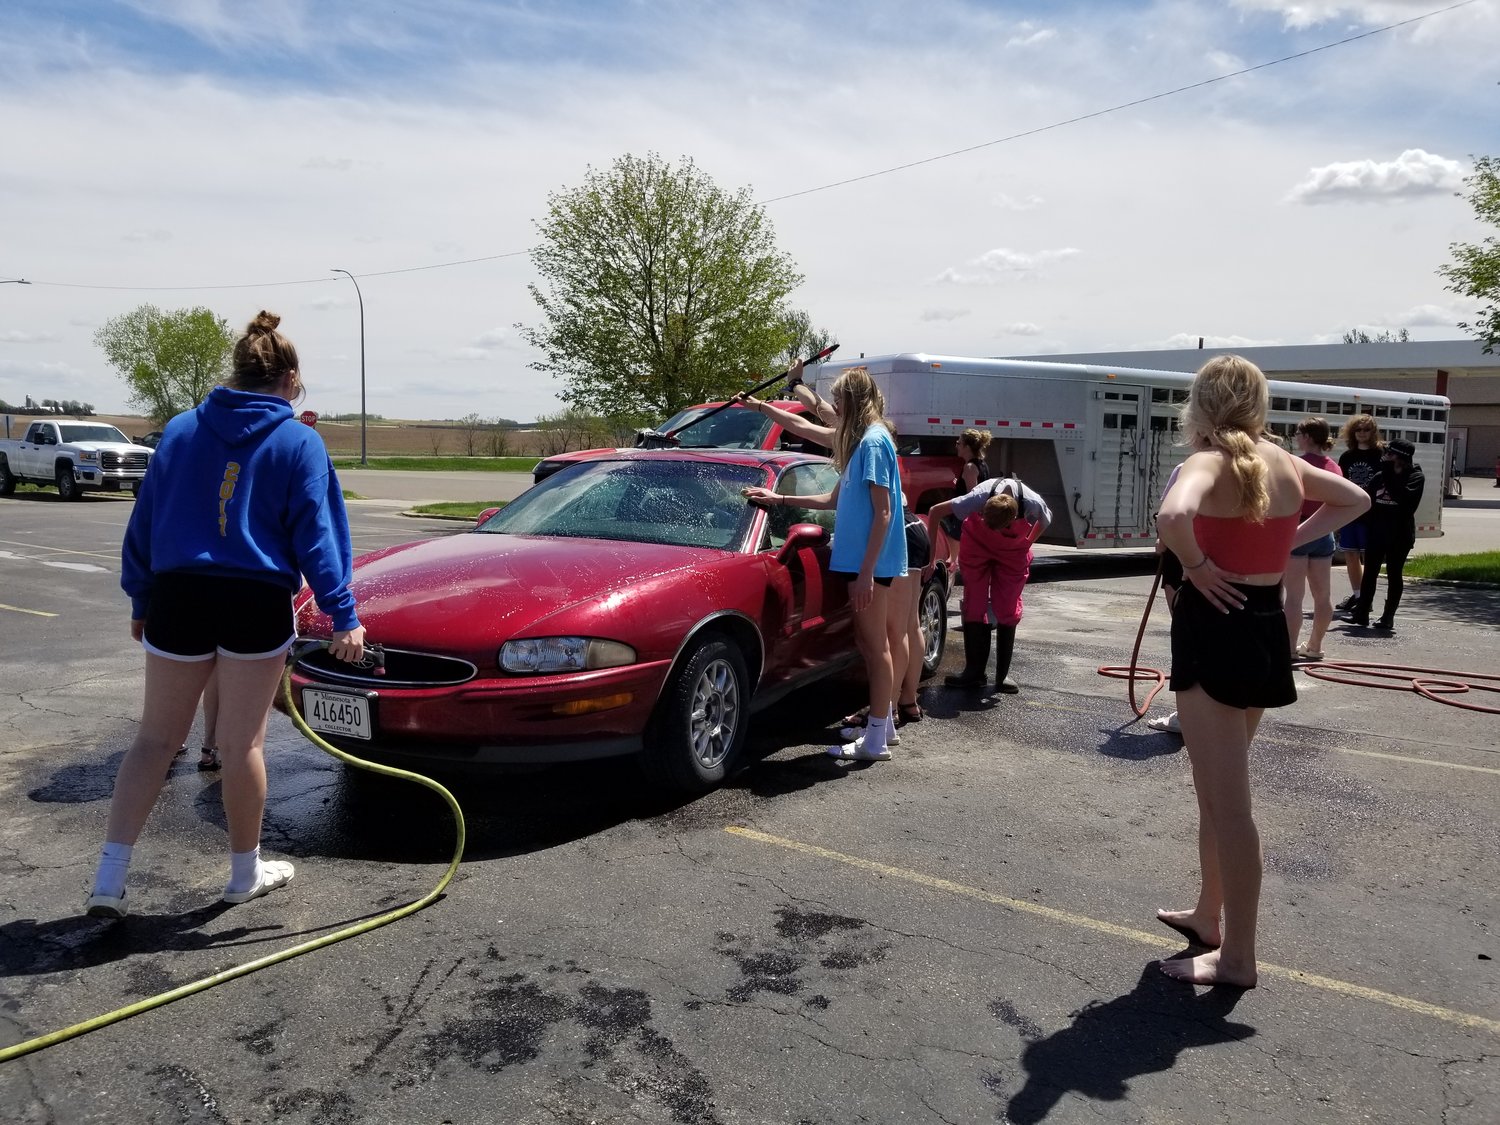 Members of the Goodhue High School National Honor Society came and went as their schedules allowed, helping out at their semi-annual car wash.  A steady line of all types of vehicles kept the crew busy and raised money for the school scholarship fund.  The Spring fund-raising event was held Sunday, May 15th in the parking lot of the ASCS building off of Highway 58.  The group will host another car wash in the Fall on a date to be determined later.